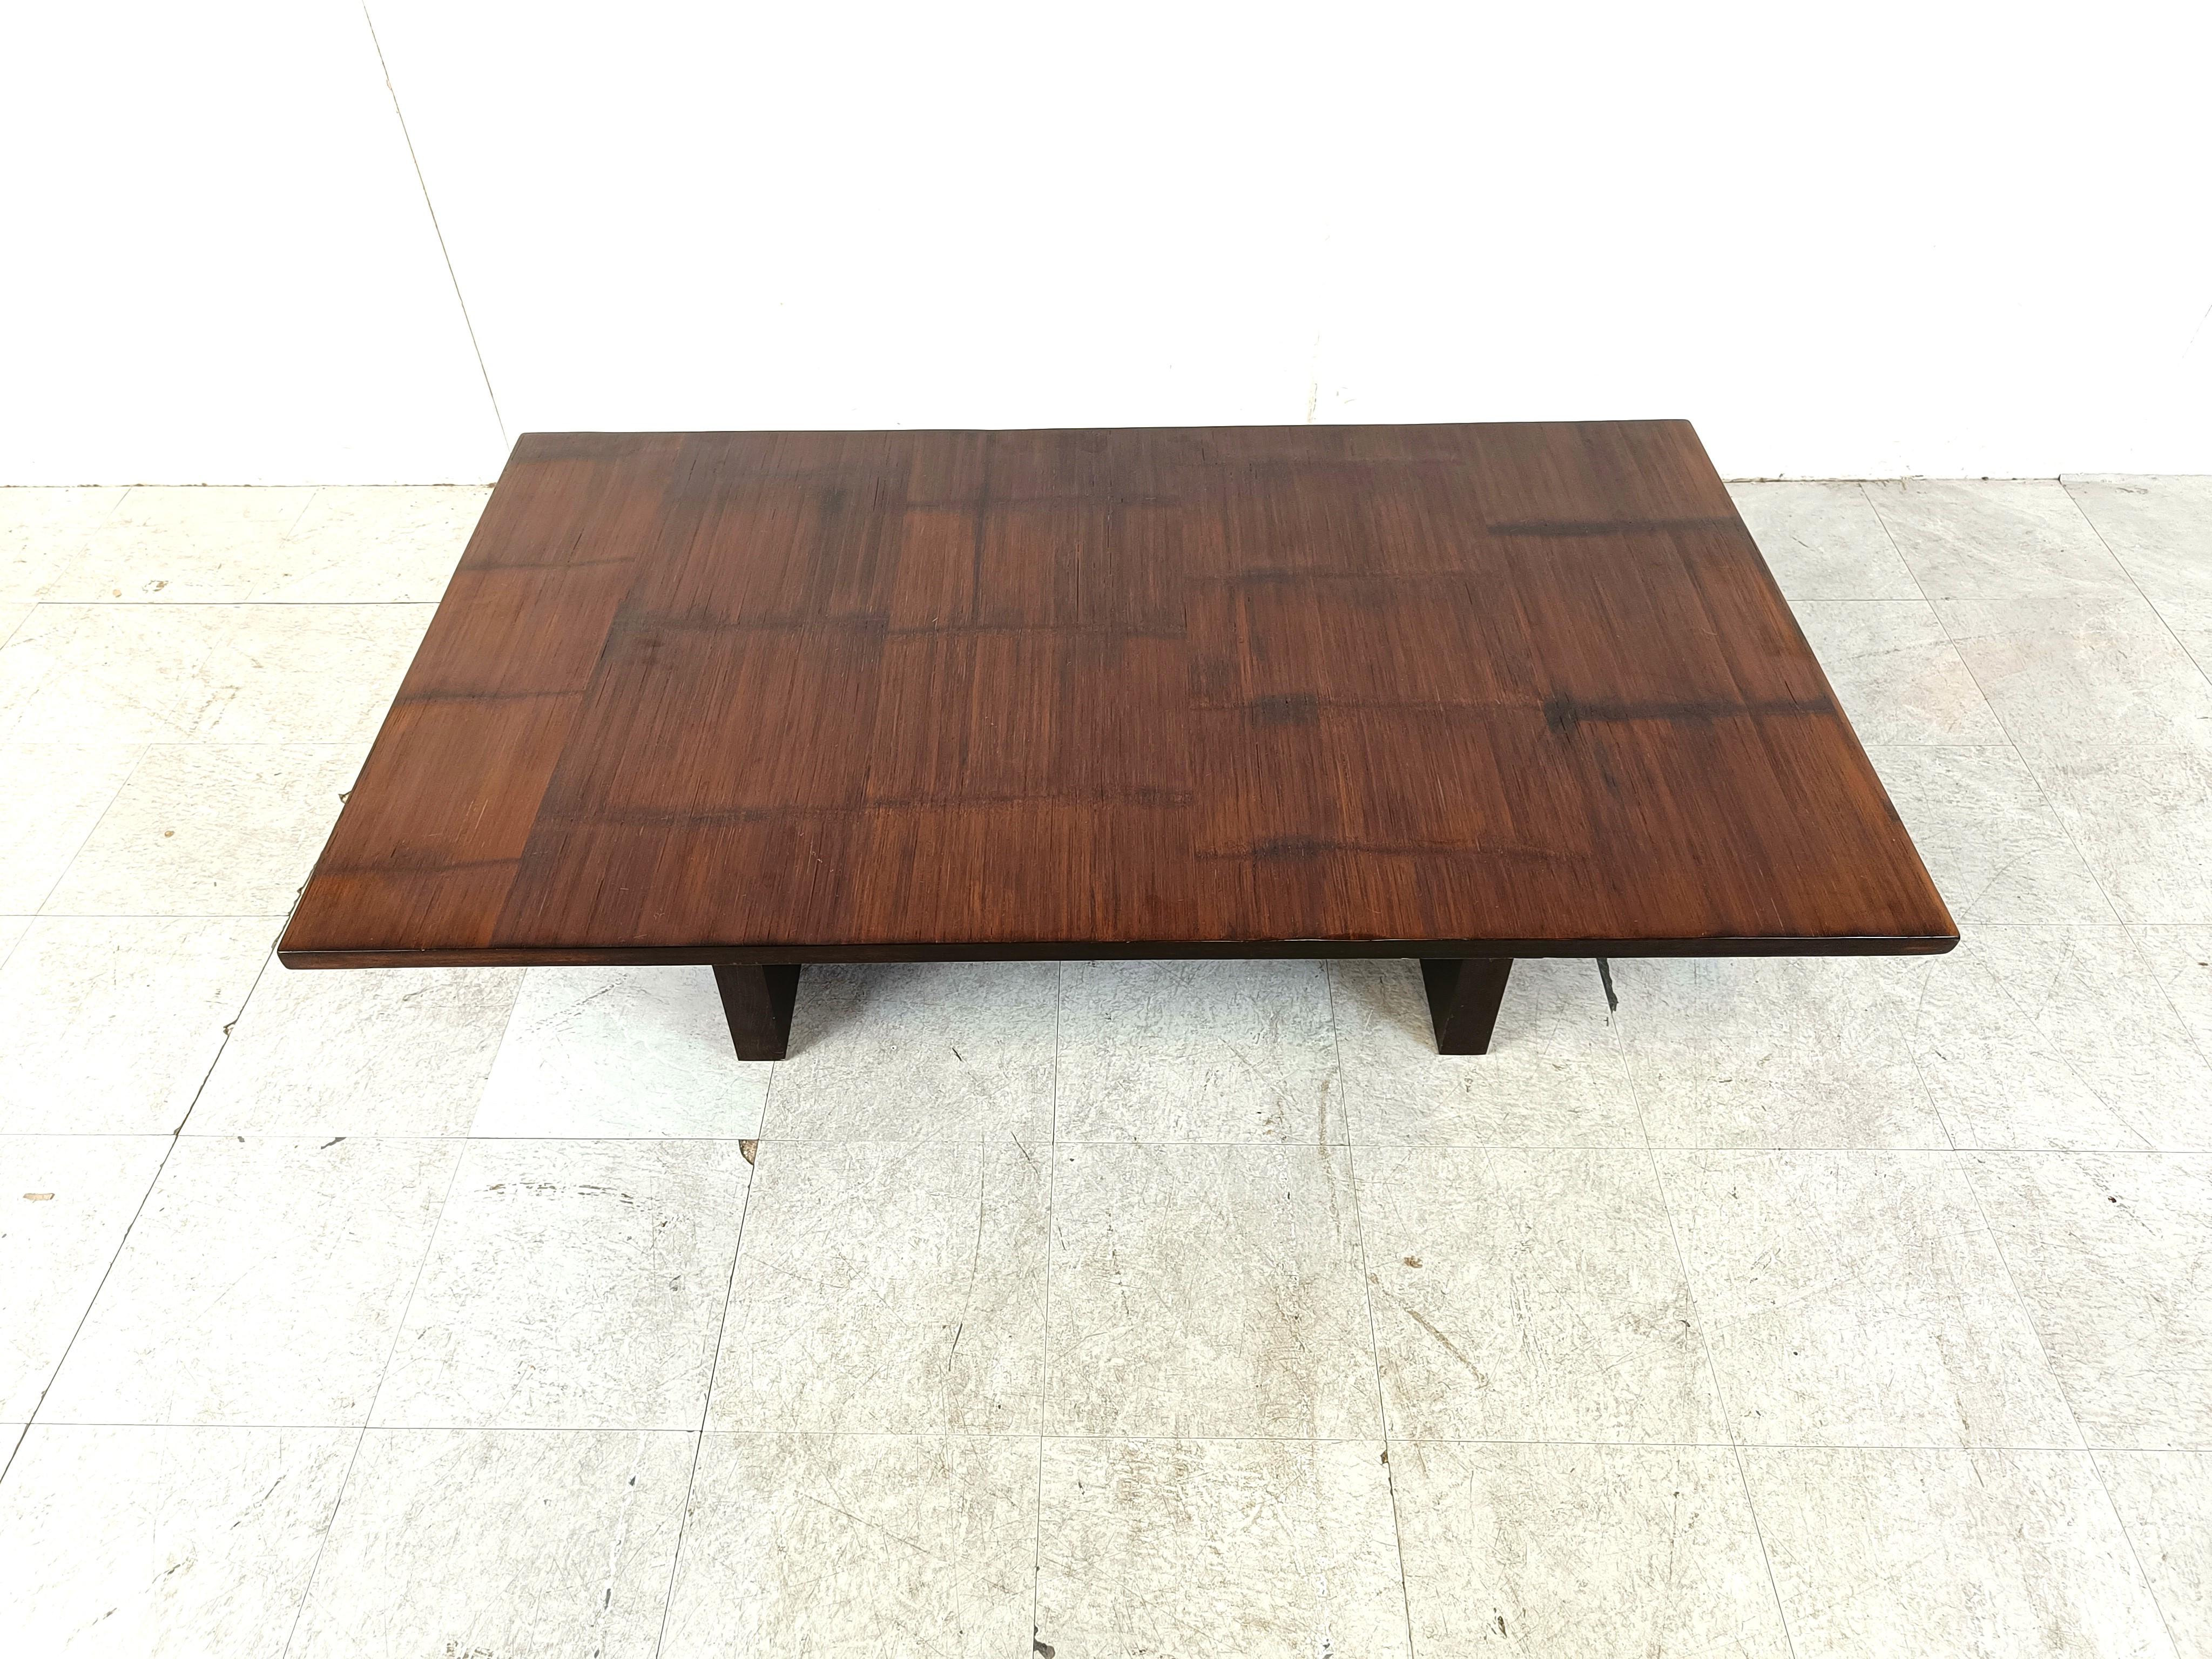 Beautiful bamboo and wenge wooden coffee table by Belgian designer Axel Vervoordt

The simple yet beautiful design and the use of high quality materials are key features of his pieces.

1980s- Belgium

Very good condition

Dimensions:
Height: